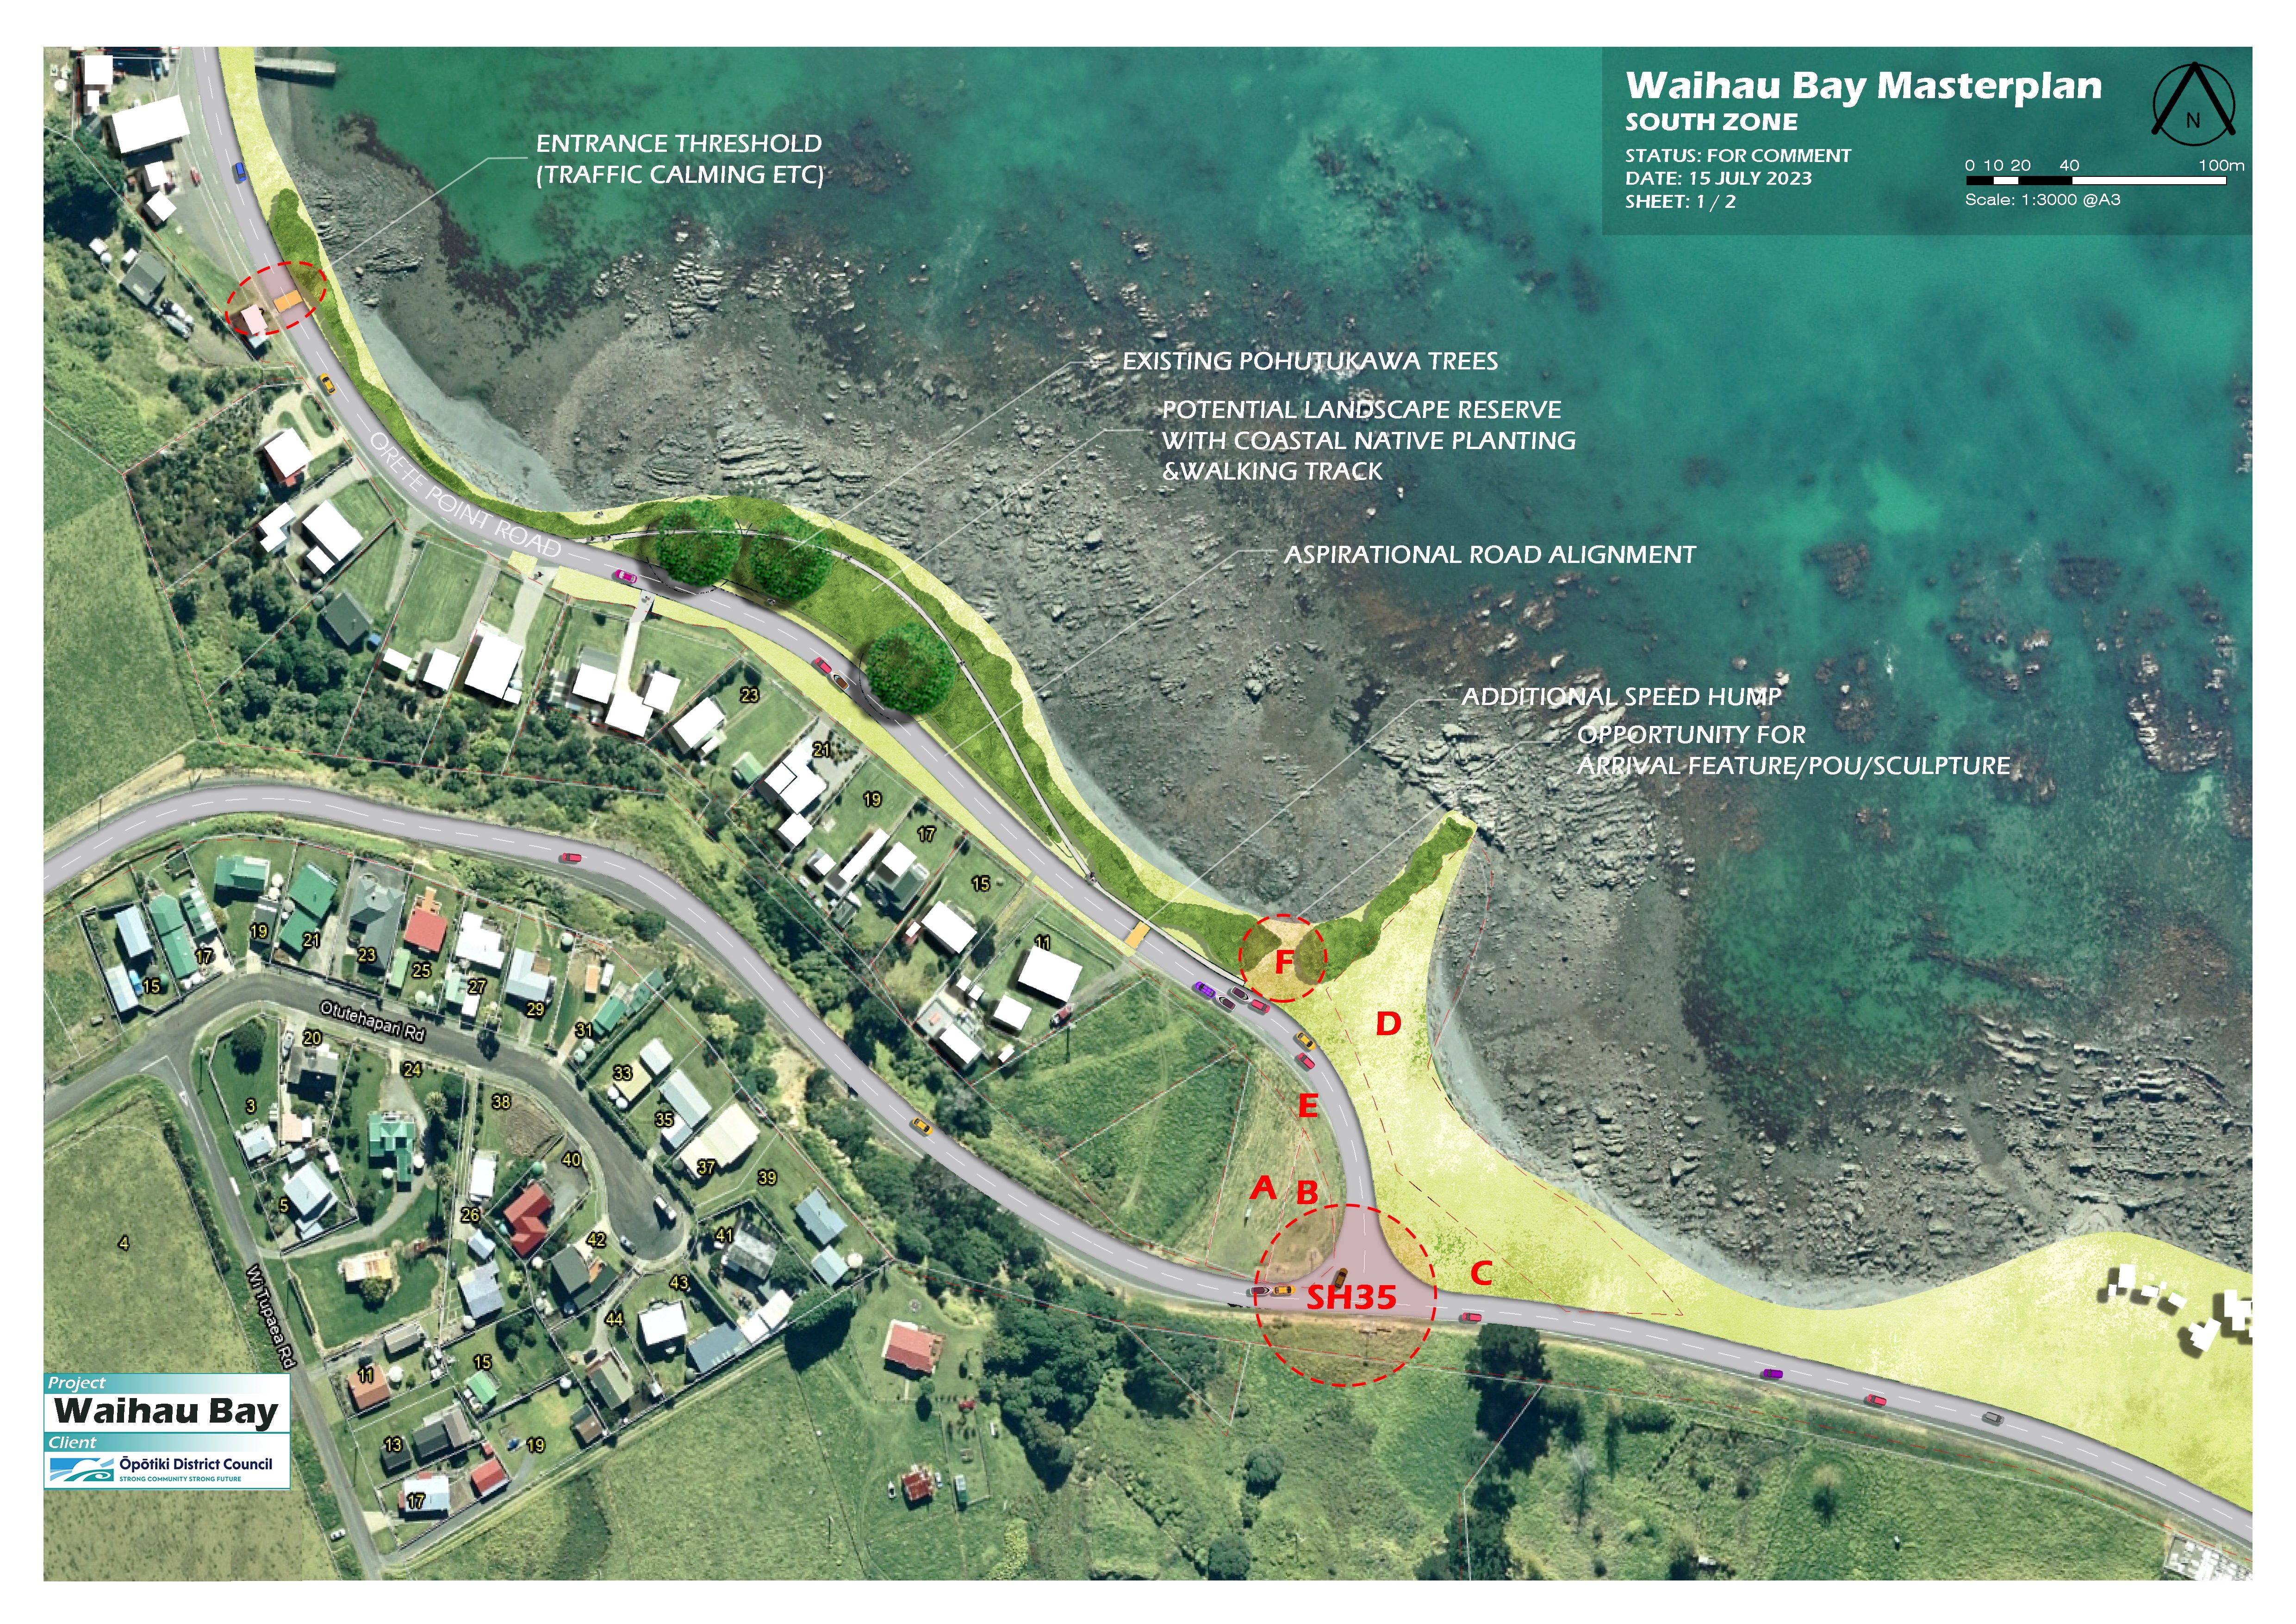 Aerial view of Waihau Bay boat ramp area with text and illustrations overlay showing suggested locations of key community facilities.   